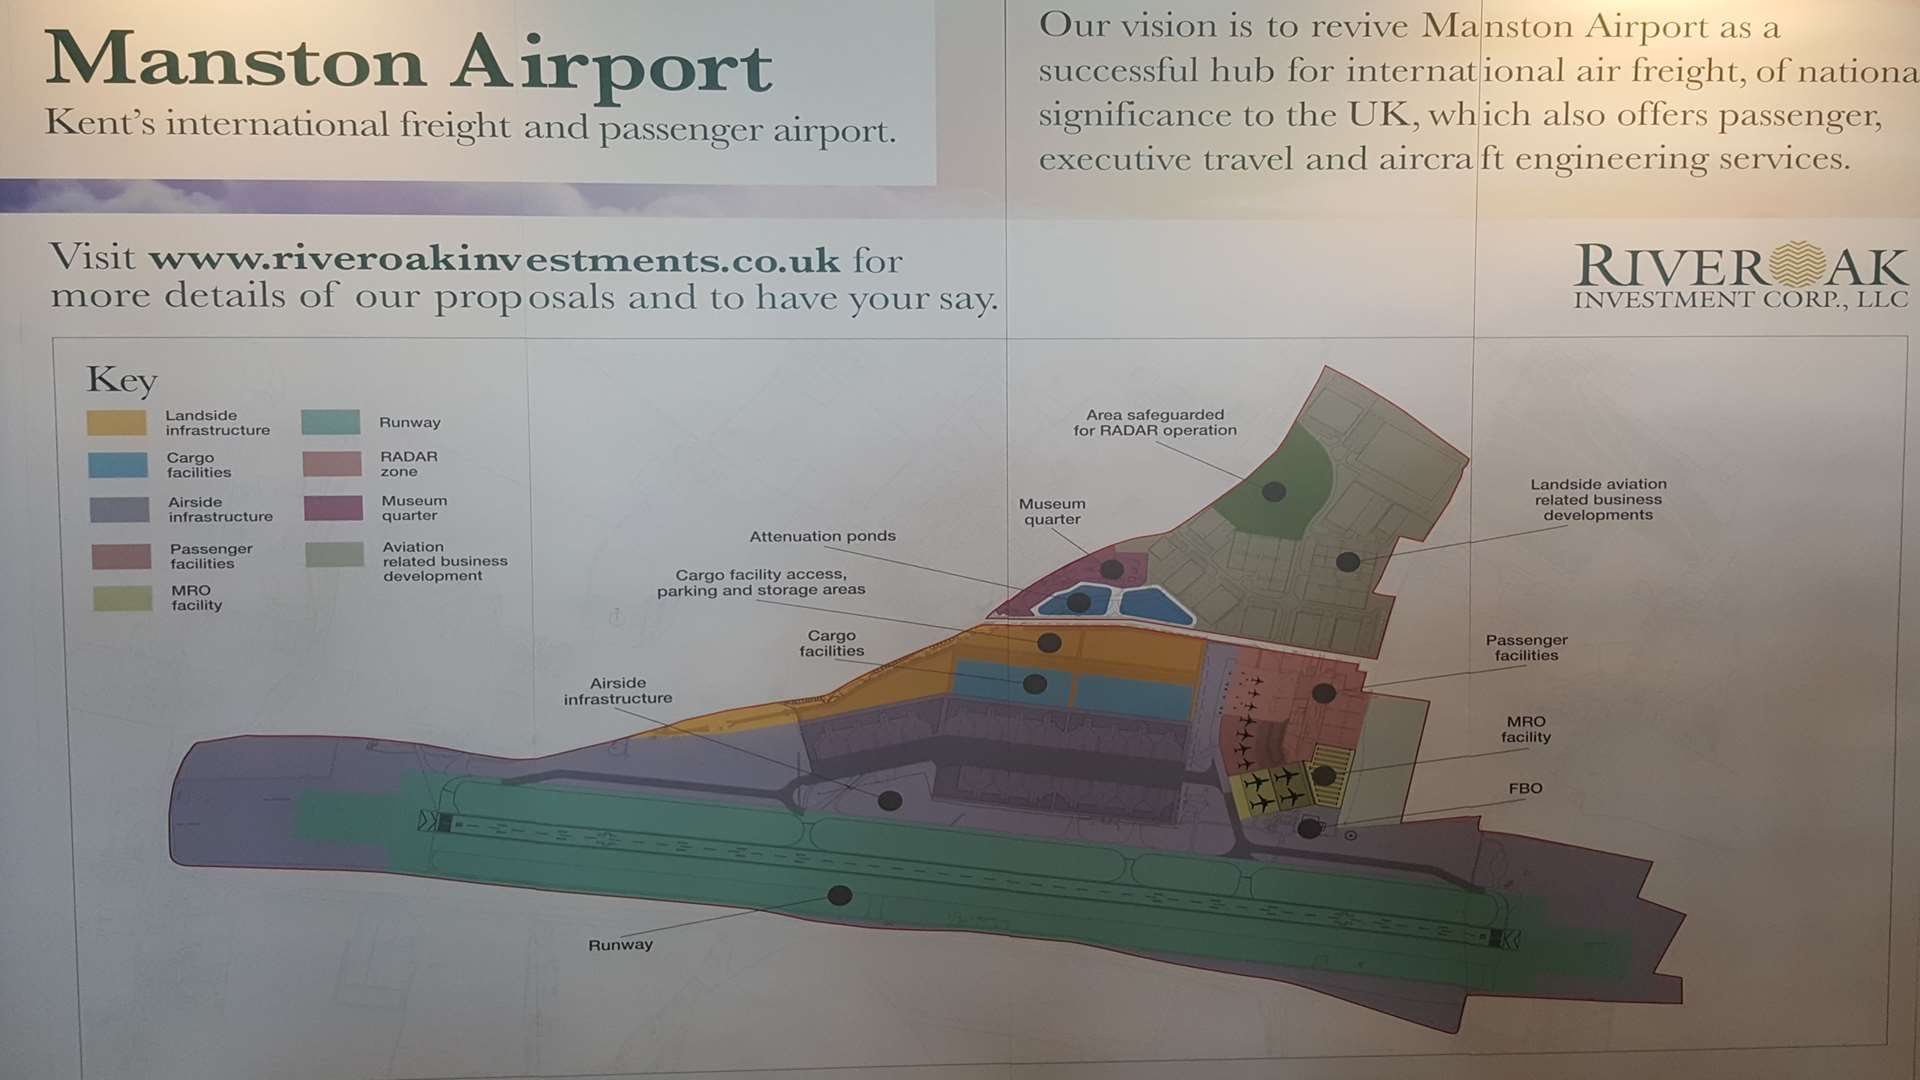 Plans for the former Manston Airport site were revealed in more detail